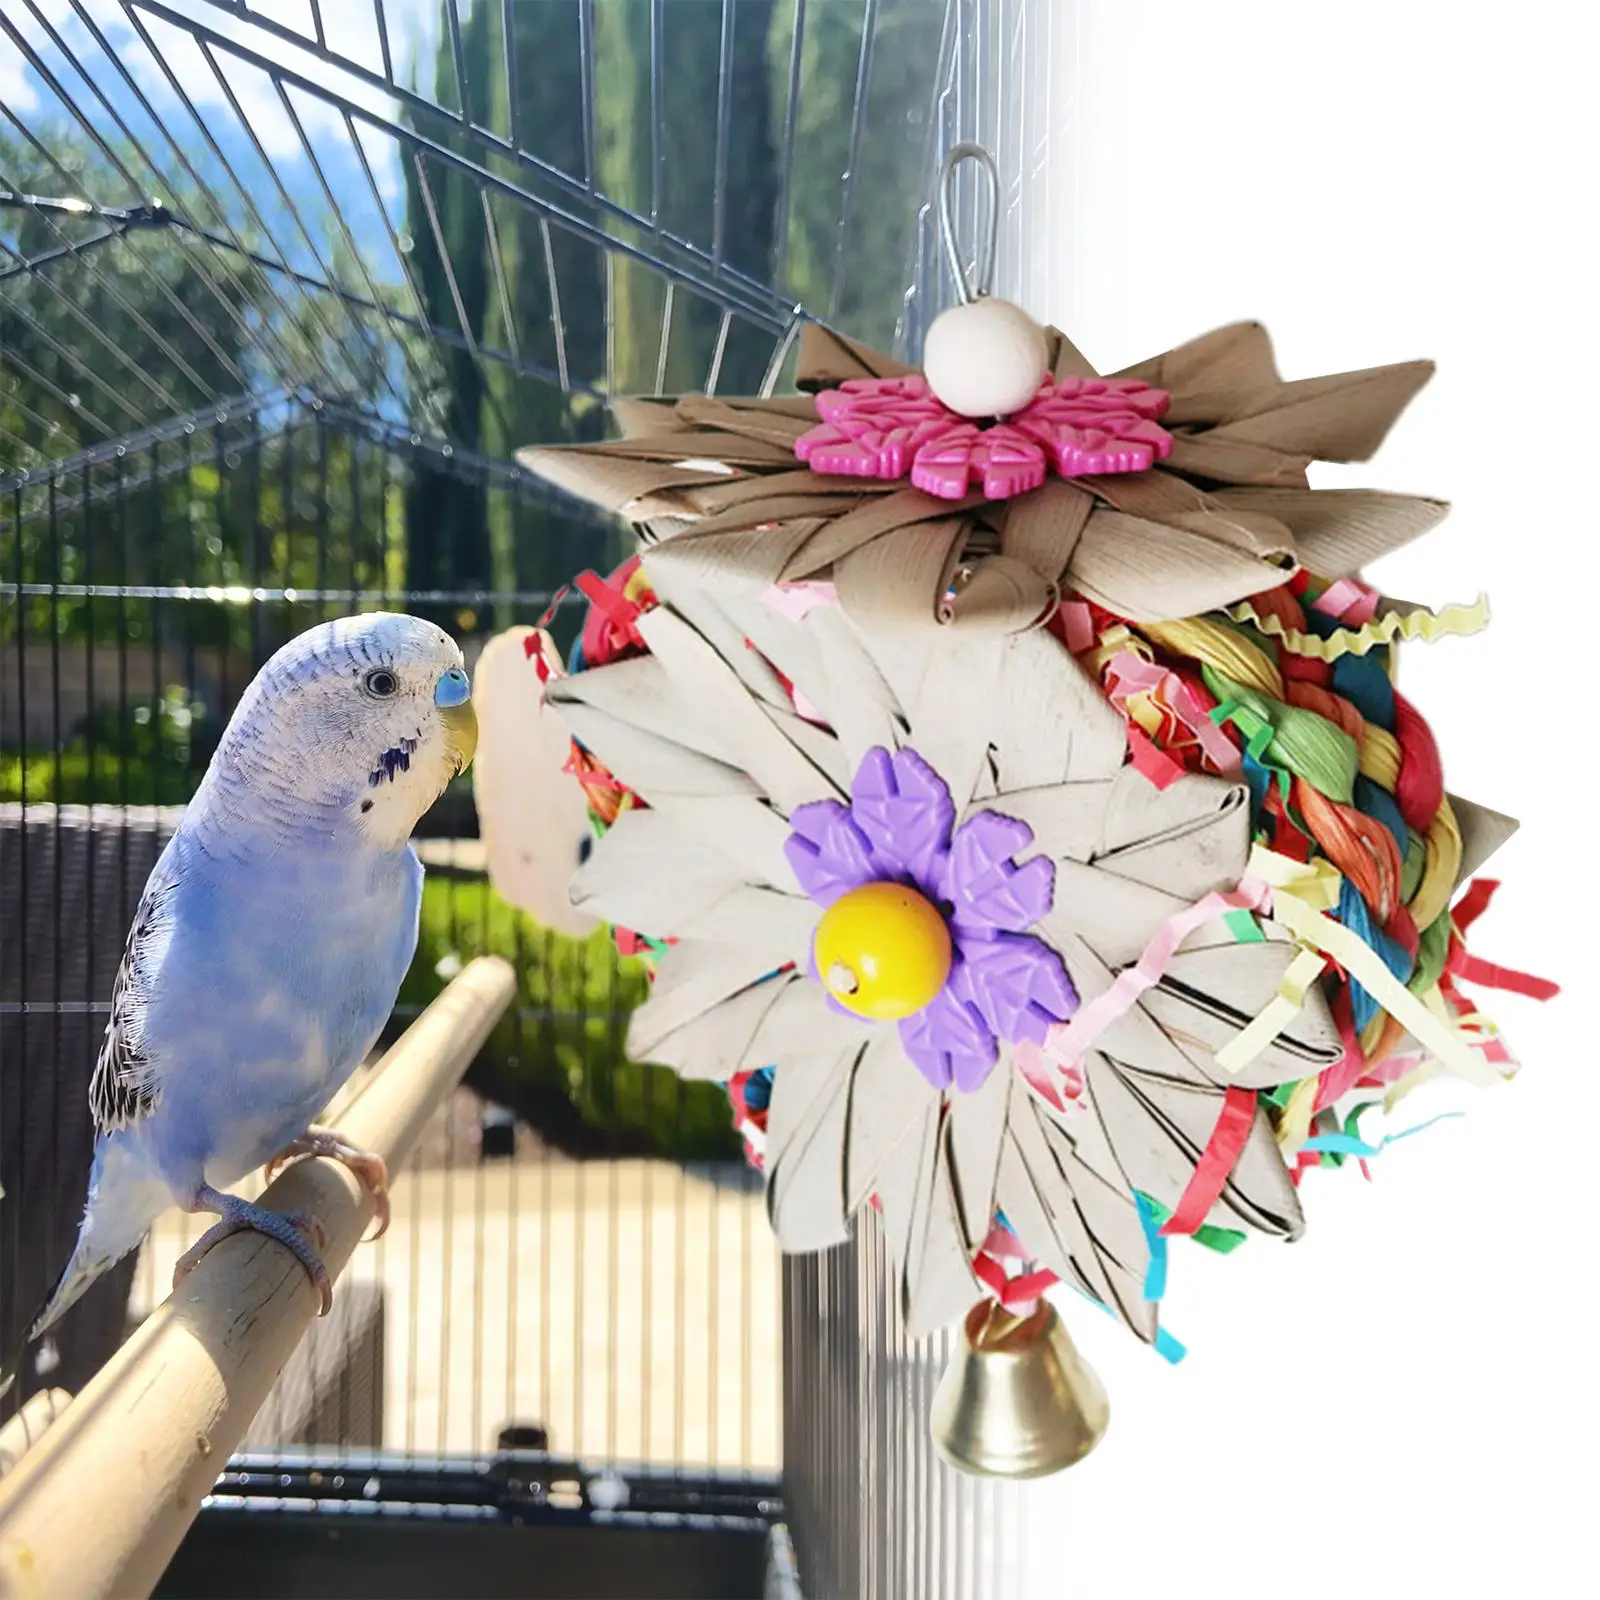 Bird Parrot Toy Wooden Hanging Funny Decorative Bird Chewing Toy for Finches Parrots Cages Decorations Cockatiel Climbing